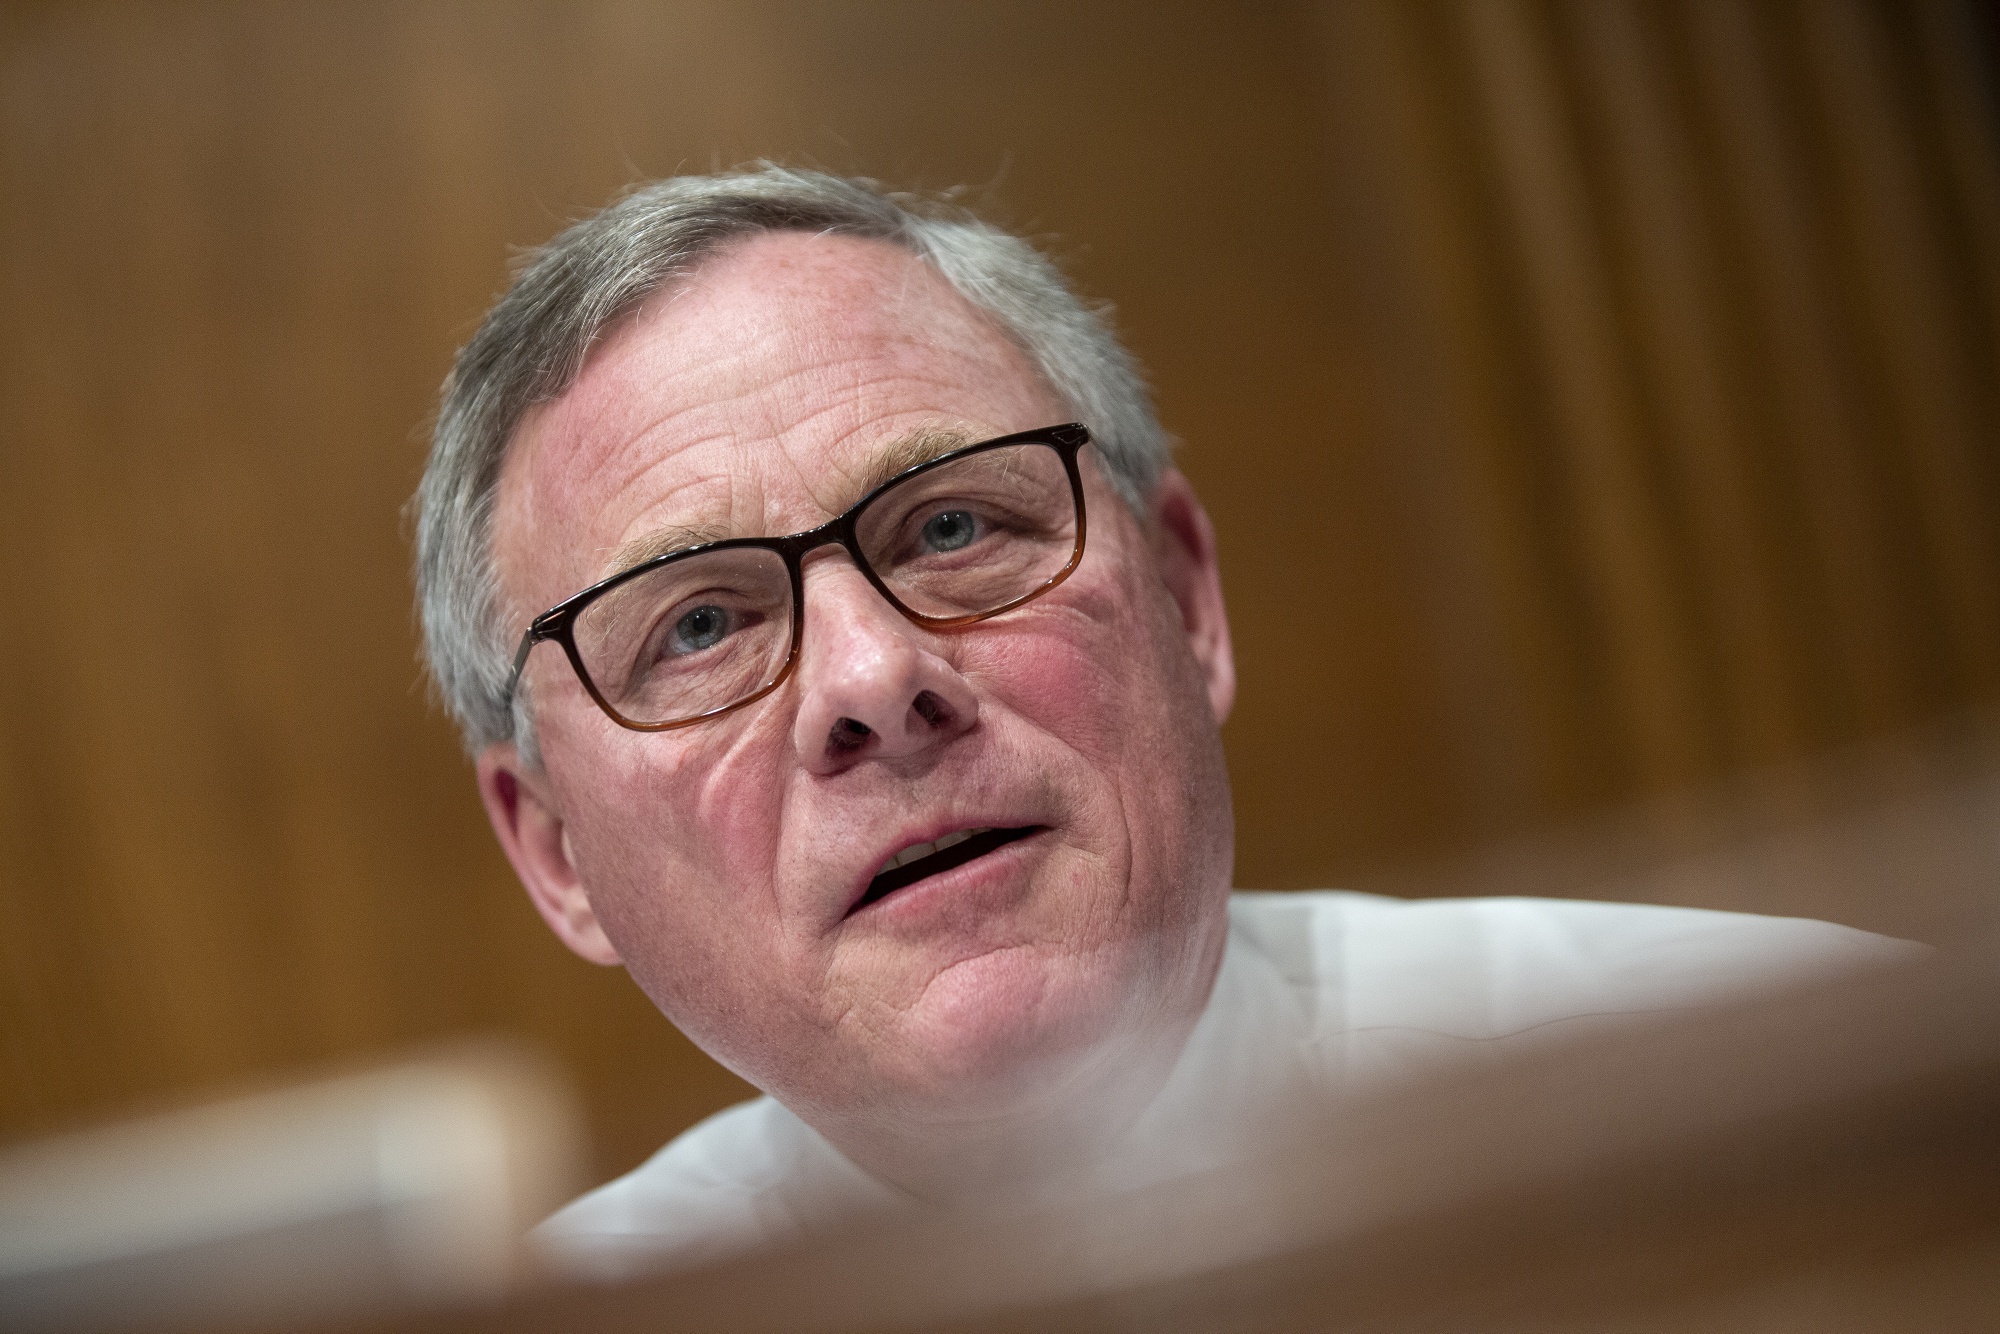 Senator Richard Burr, a Republican from North Carolina, speaks during a U.S. Senate Committee on Health, Education, Labor, and Pensions hearing at the U.S. Capitol in Washington on&nbsp; March 3, 2020.&nbsp;